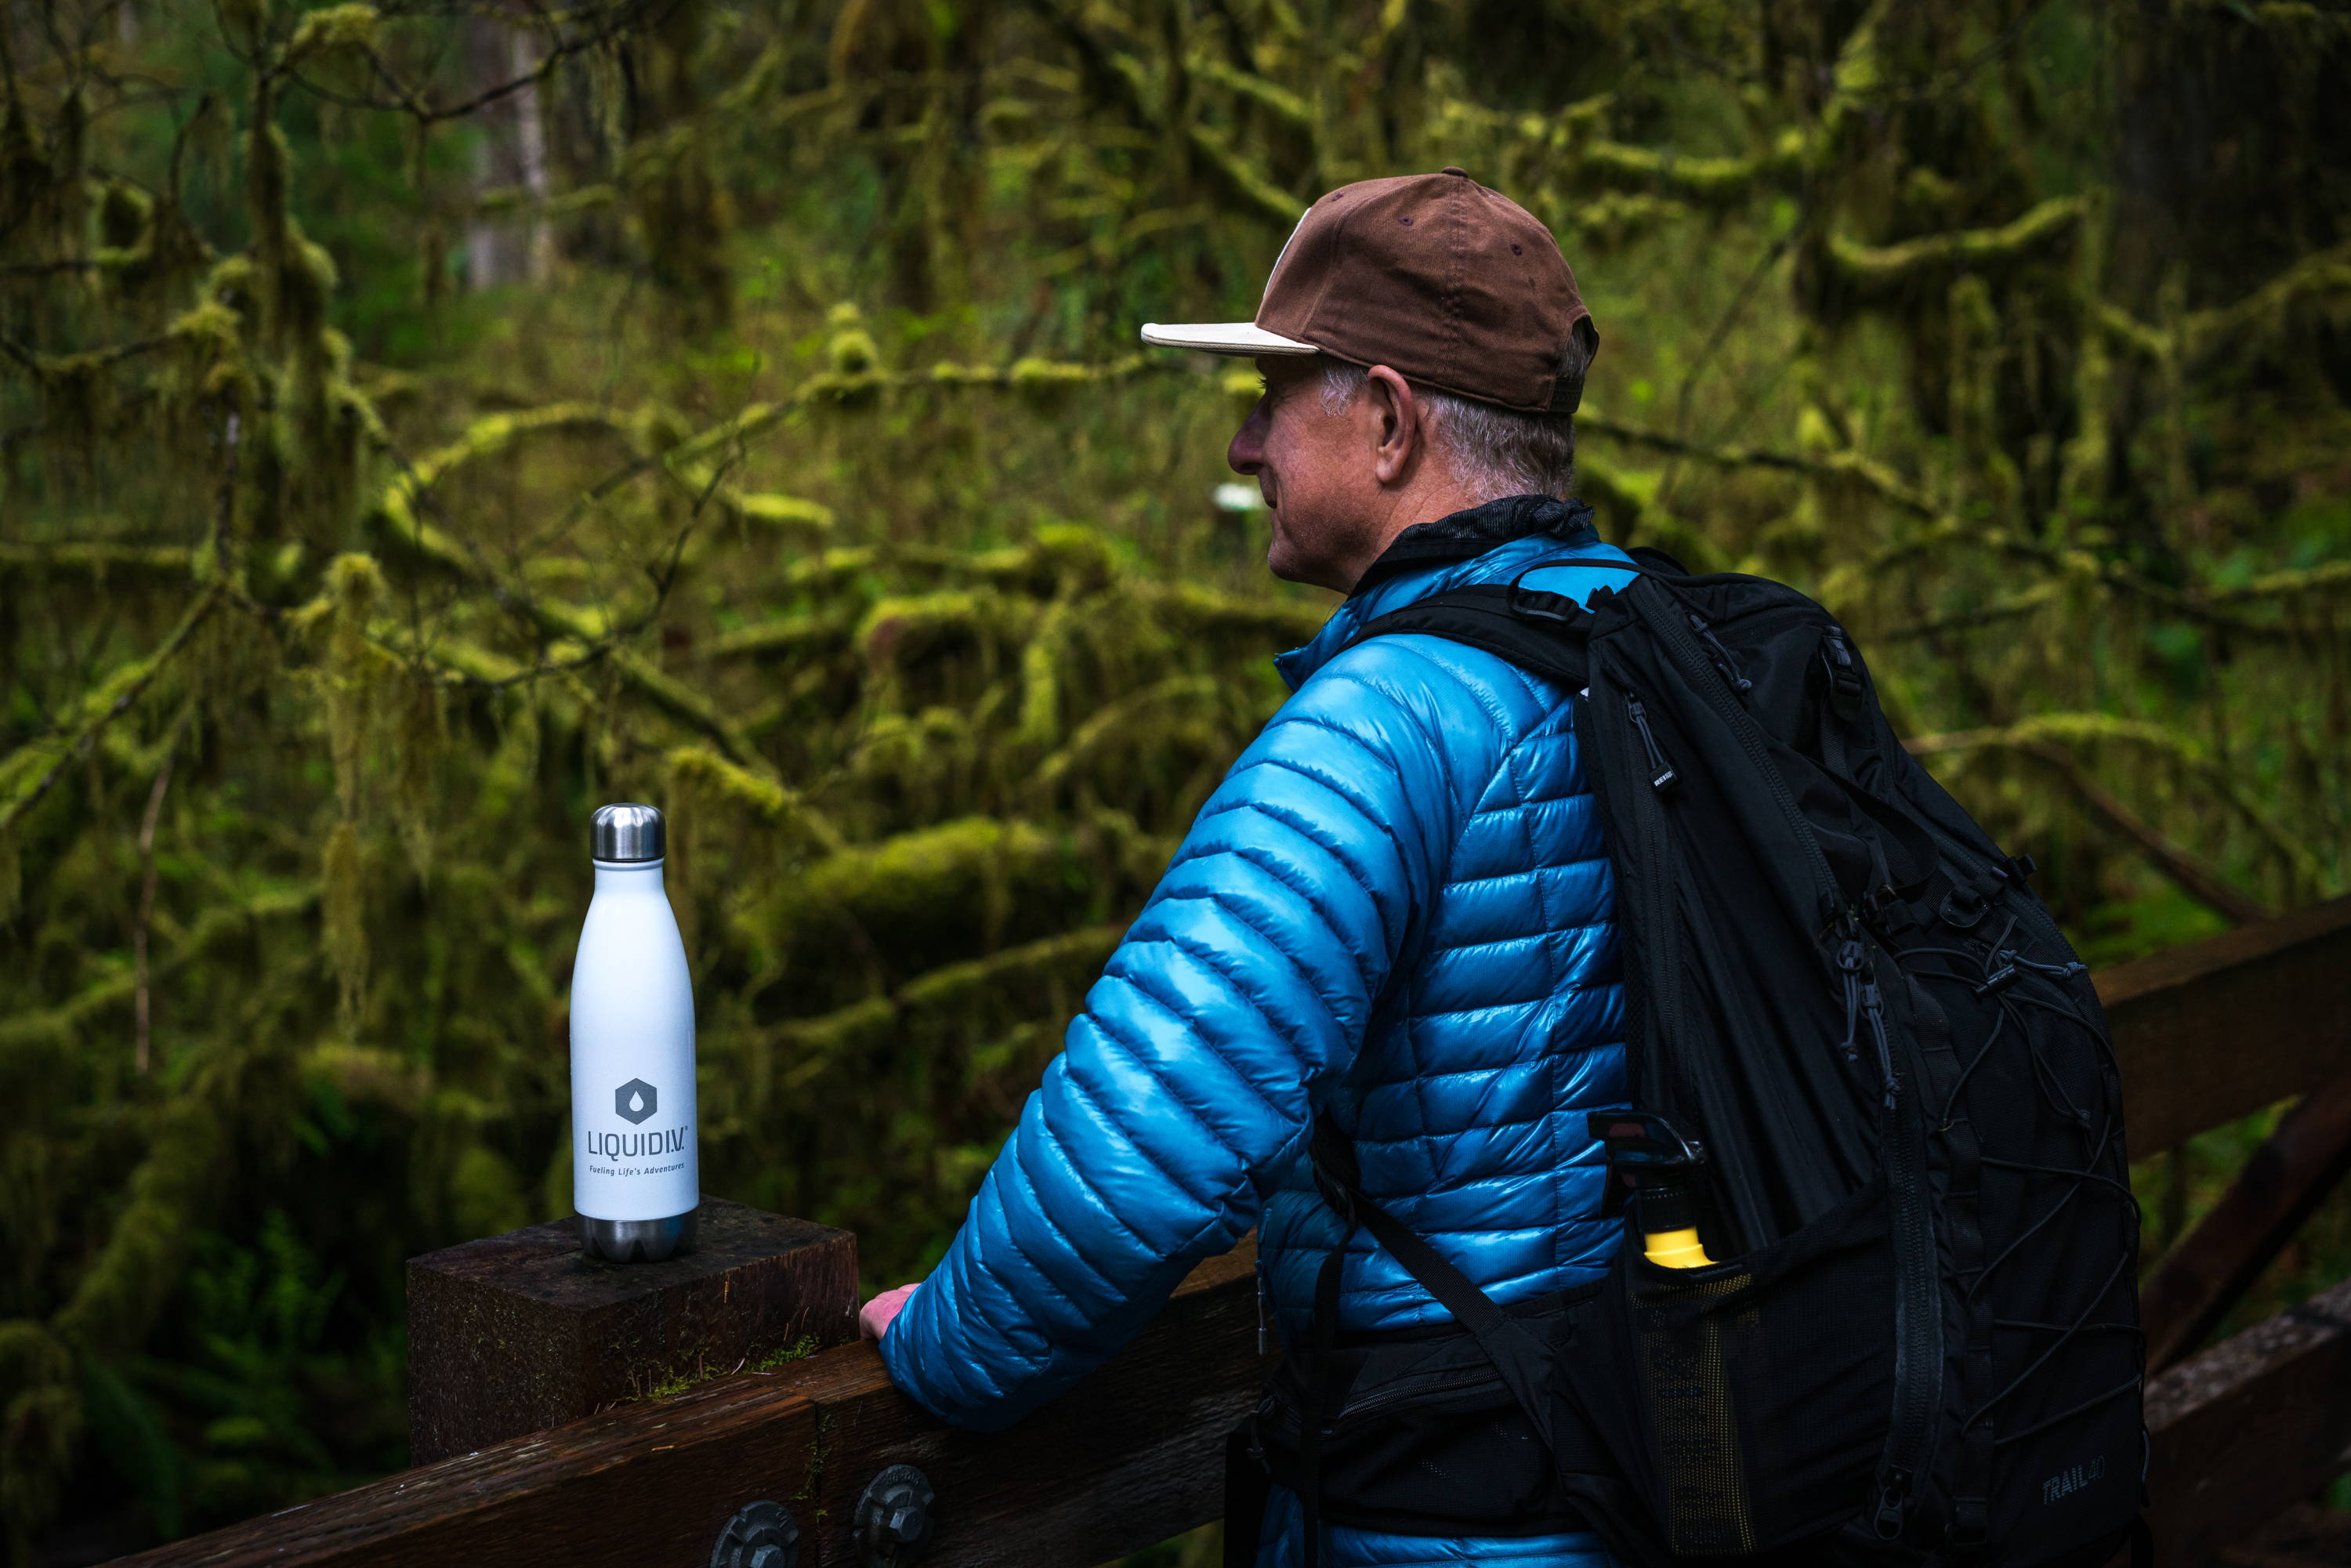 An outdoor enthusiast stands next to his Liquid IV water bottle.